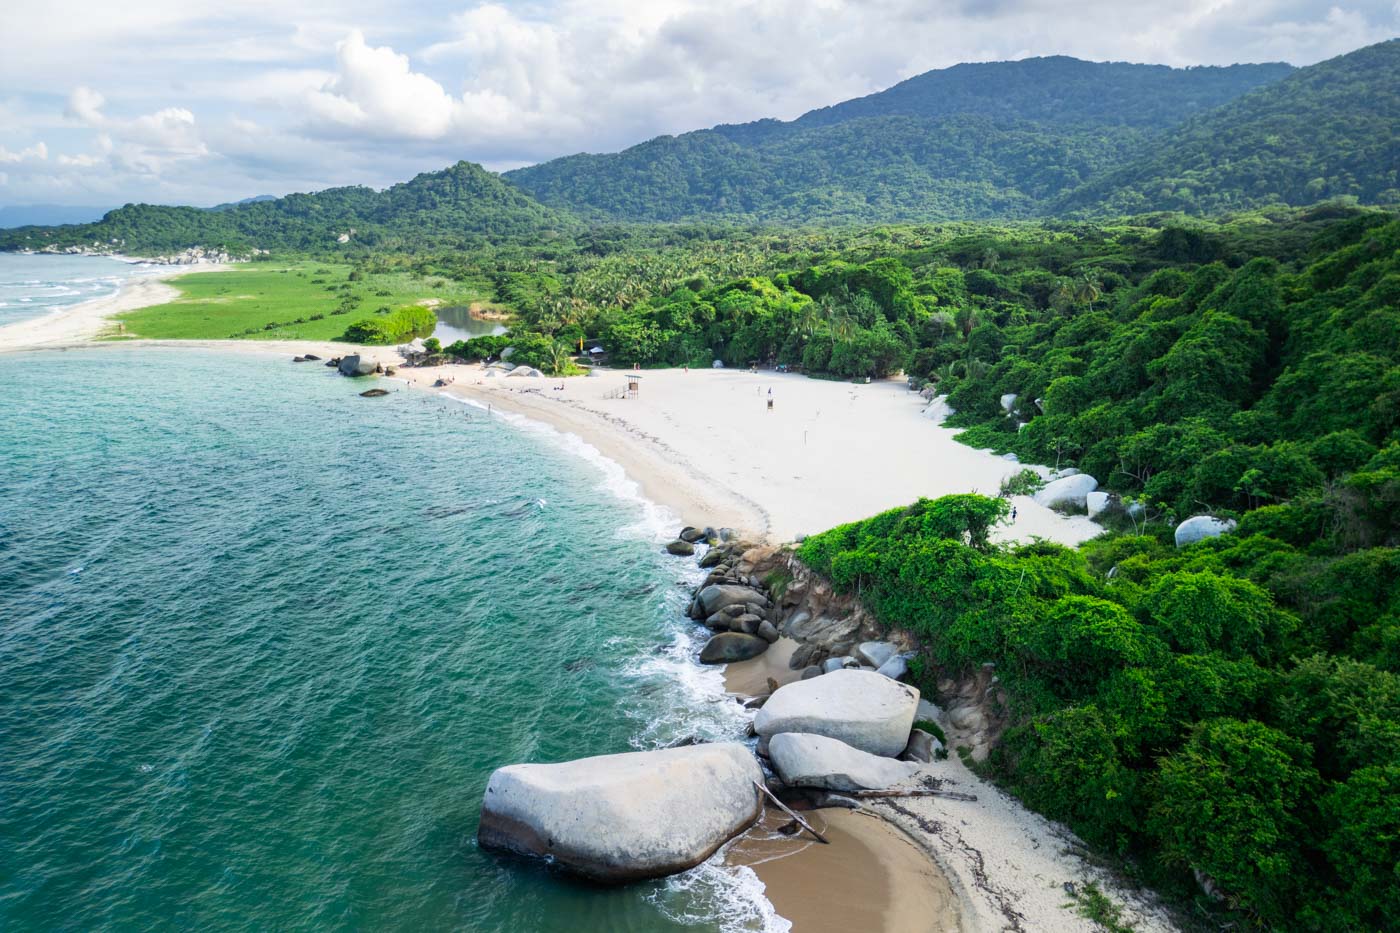 Aerial view over Playa Arenilla surrounded by ocean, rocks and forest in Tayrona.